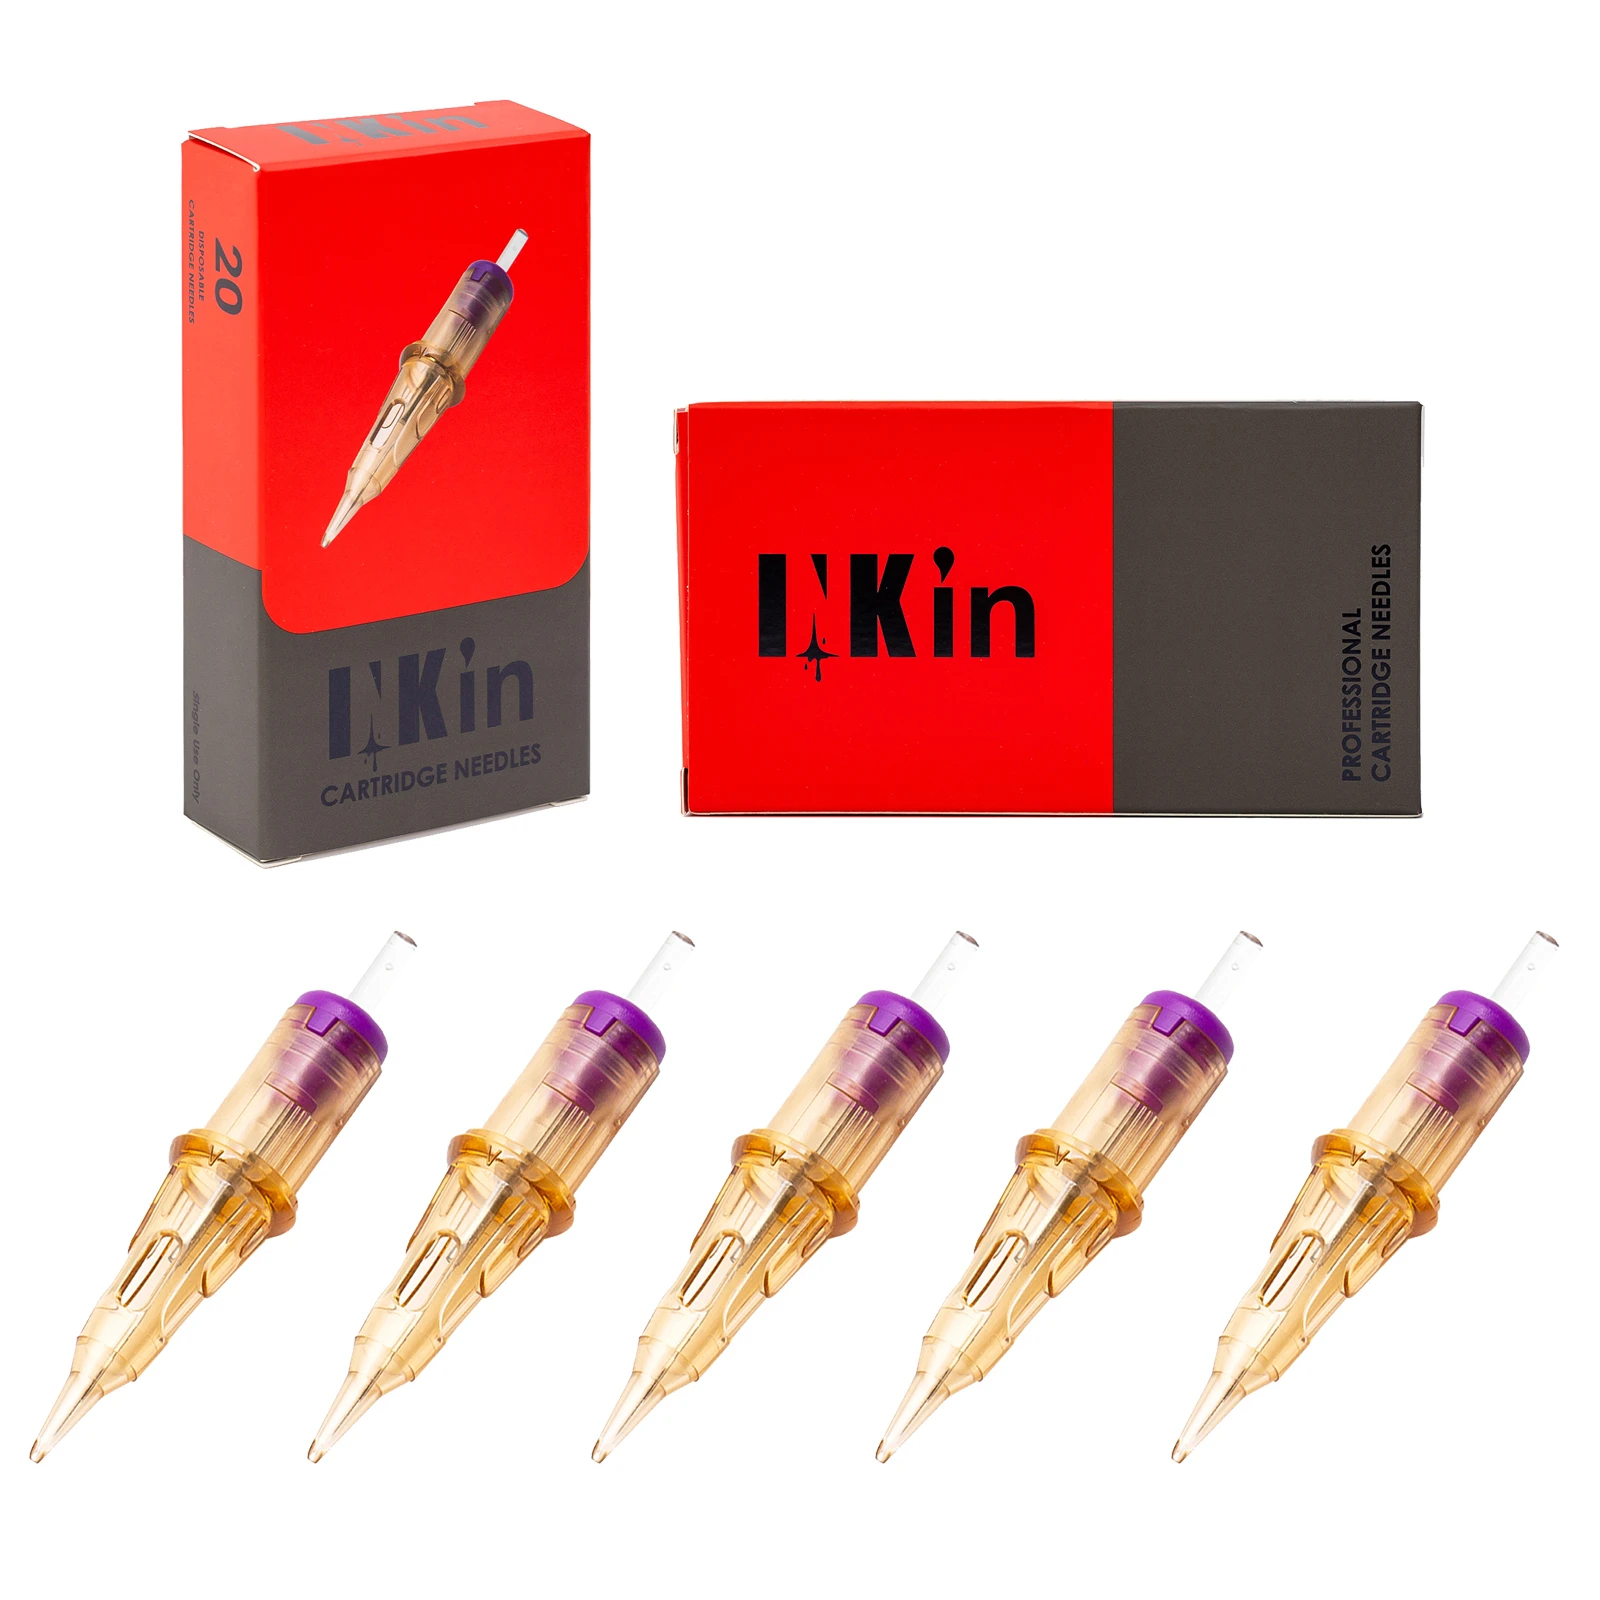 100 Pcs Assorted Sizes INKIN Tattoo Needles Cartridge Rould Liner 1R 3R Mixed Types for Tattoo Permanent Makeups Pen Machines